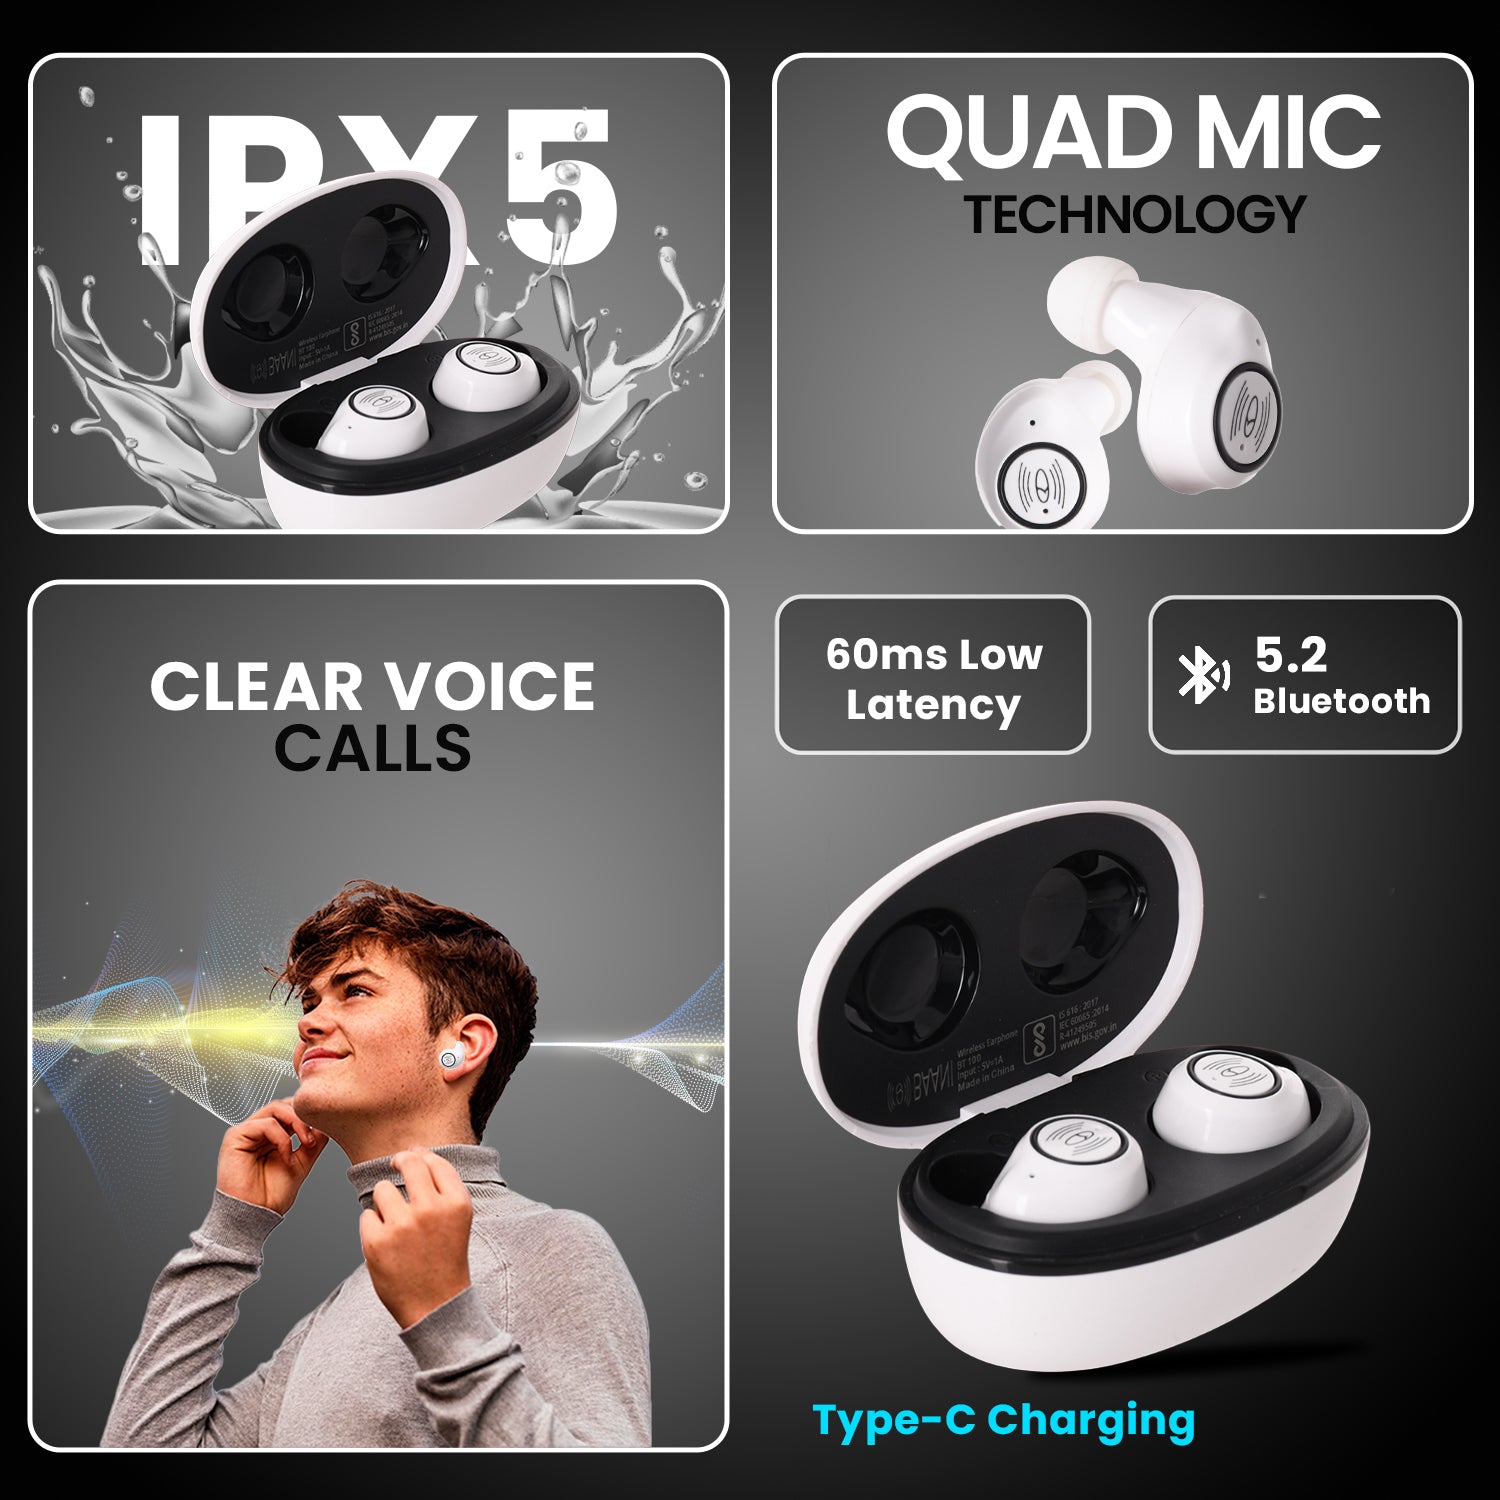 Baani Audio Truly Wireless Earbuds Earphones With Mic With 40 Hrs Playtime Crystal Clear Voice Hifi Sound Quality Instant Pairing Type-C Charging Low Latency Gaming Ipx5 (Bt100 - White) - In Ear